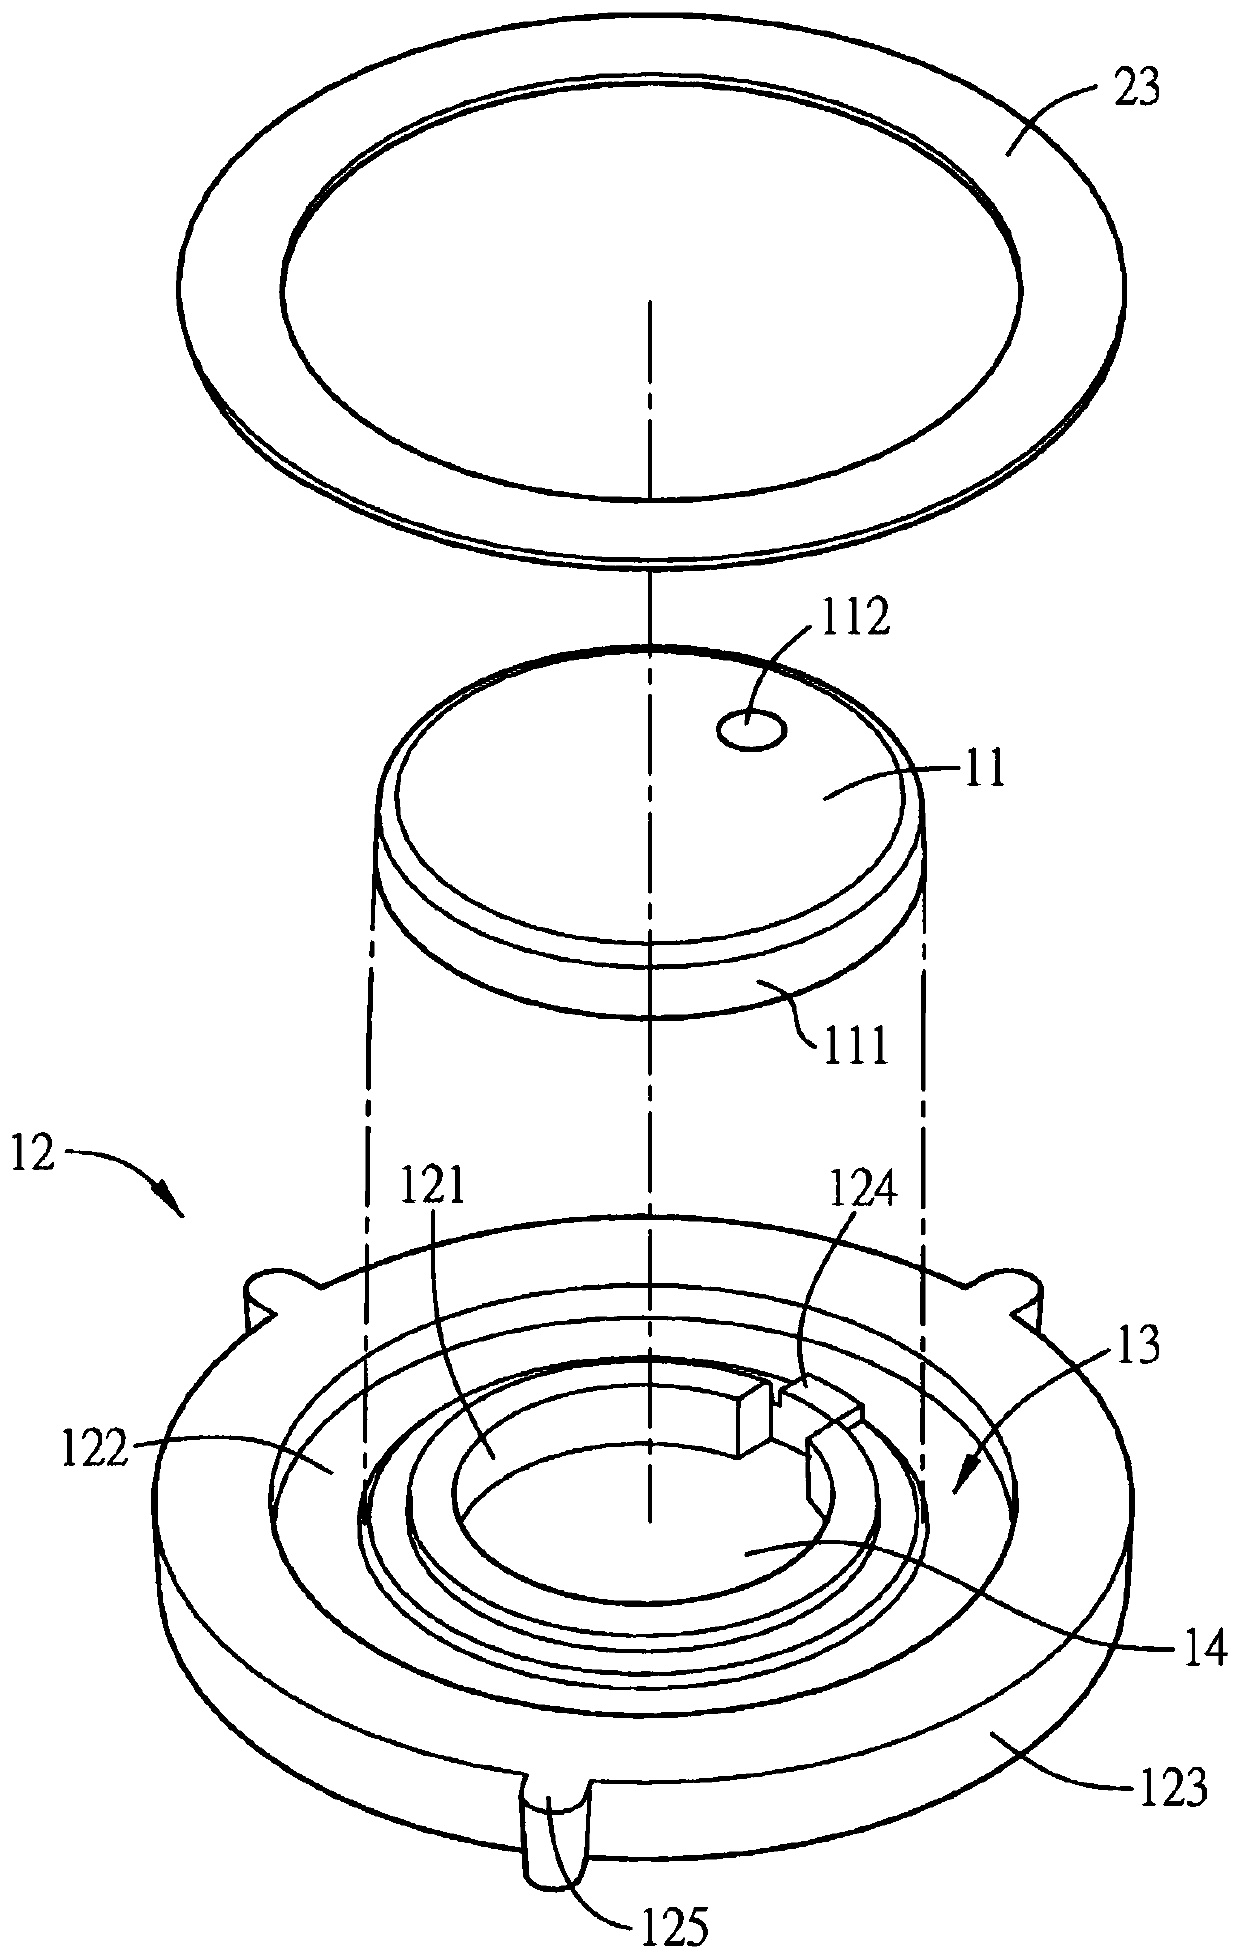 Electronic device and button structure